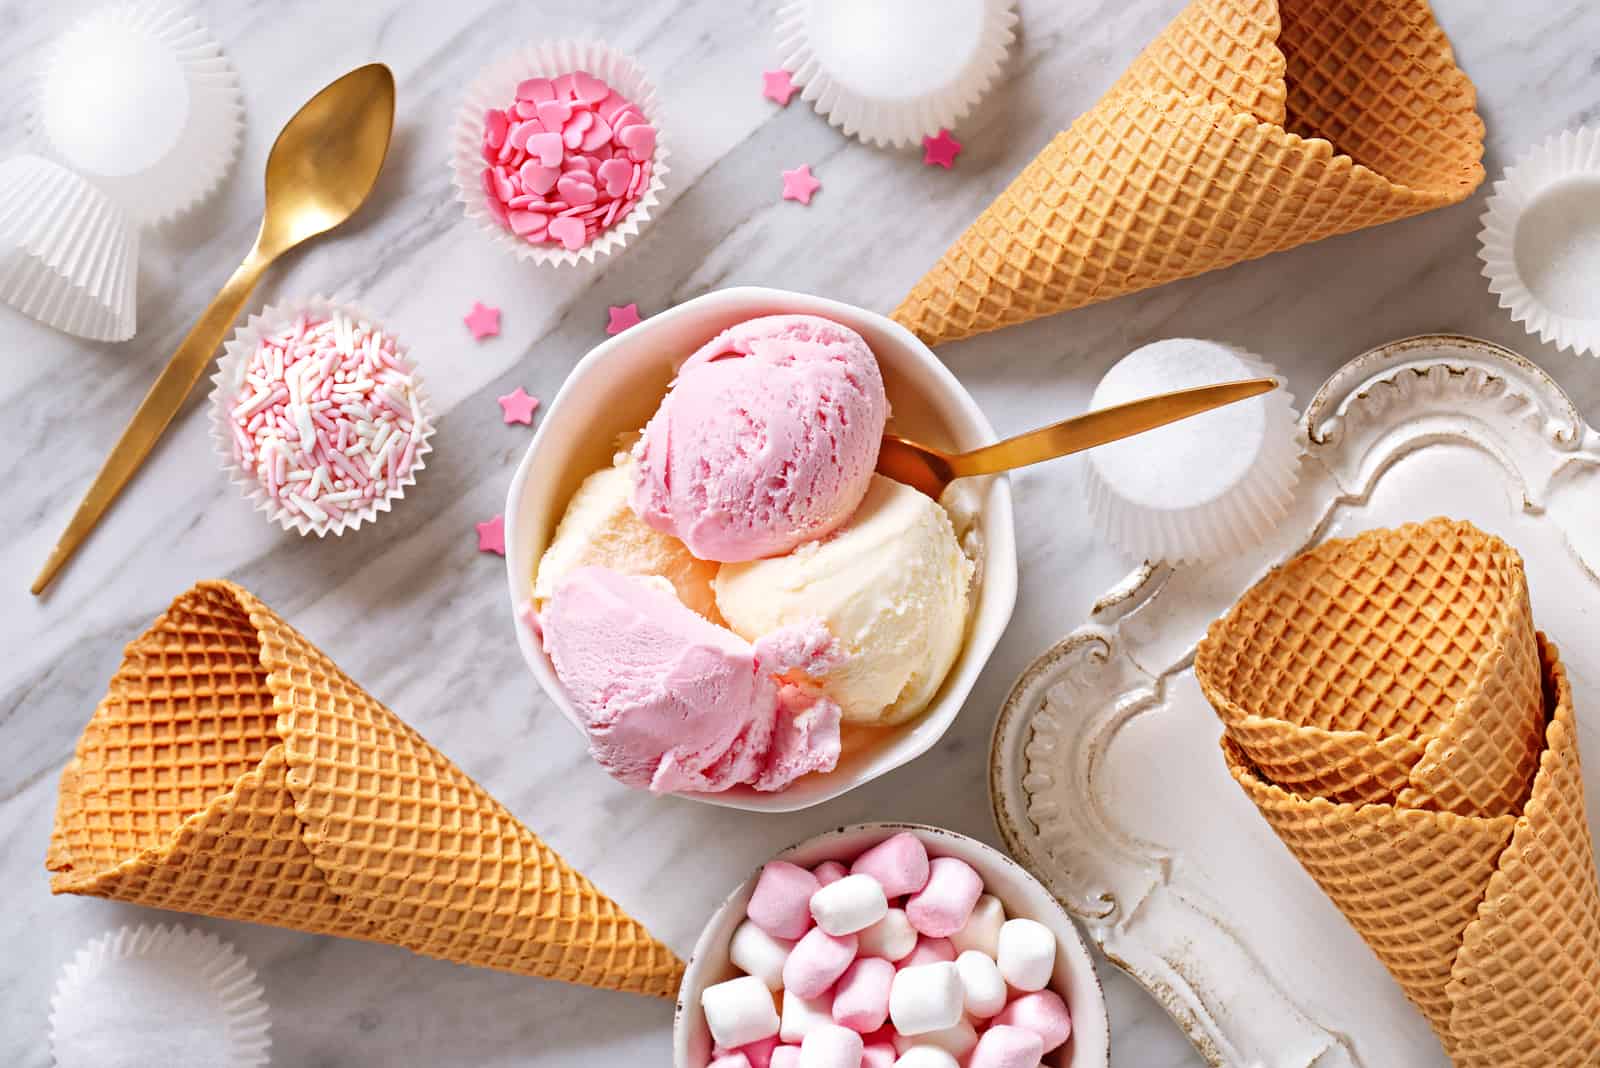 200 Sweetest Quotes About Gelato For Instagram + Captions